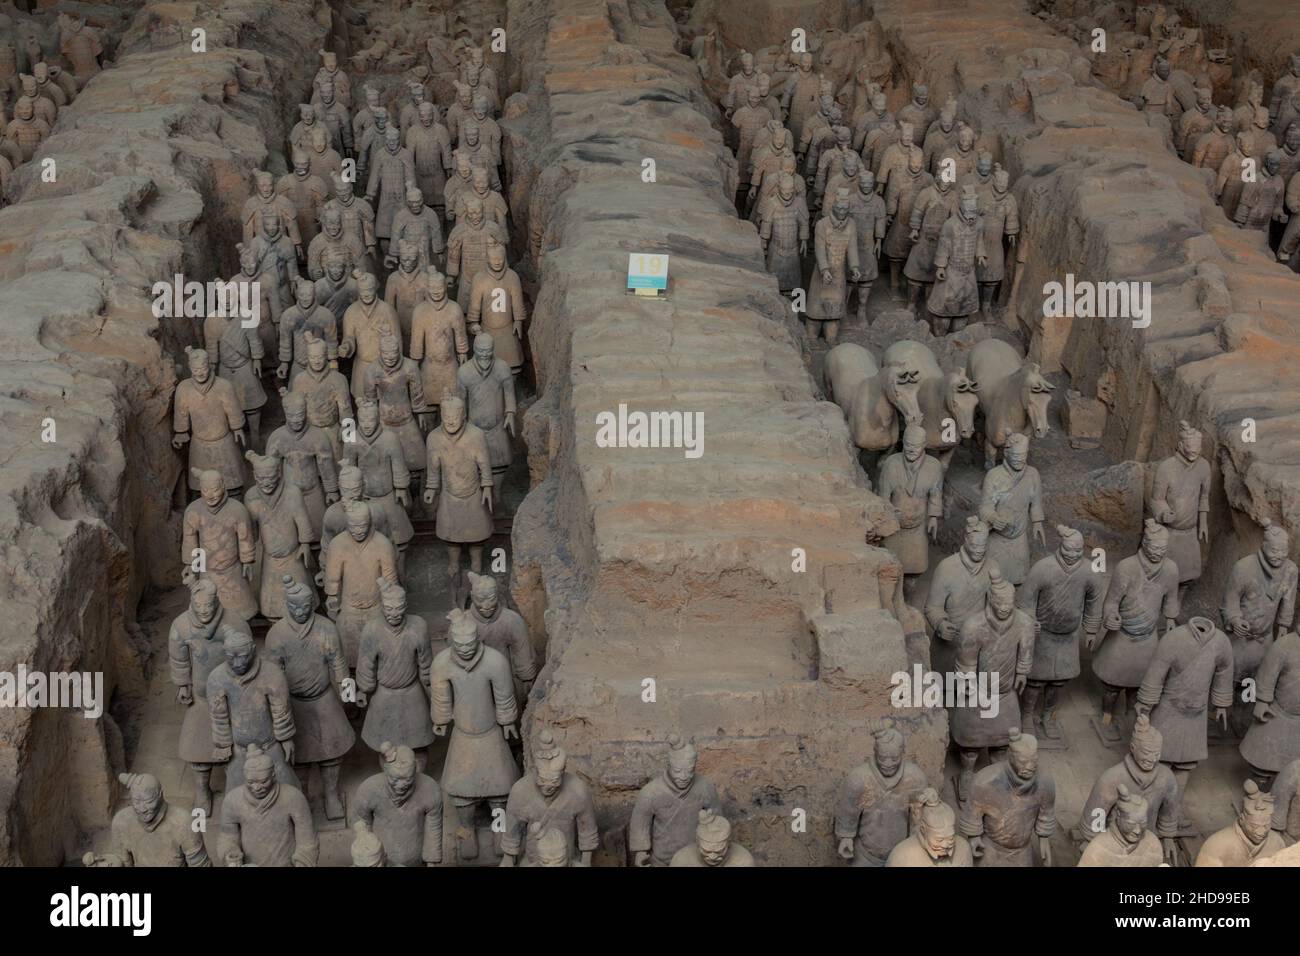 XI'AN, CHINA - AUGUST 6, 2018: Rows of the Army of Terracotta Warriors near Xi'an, Shaanxi province, China Stock Photo